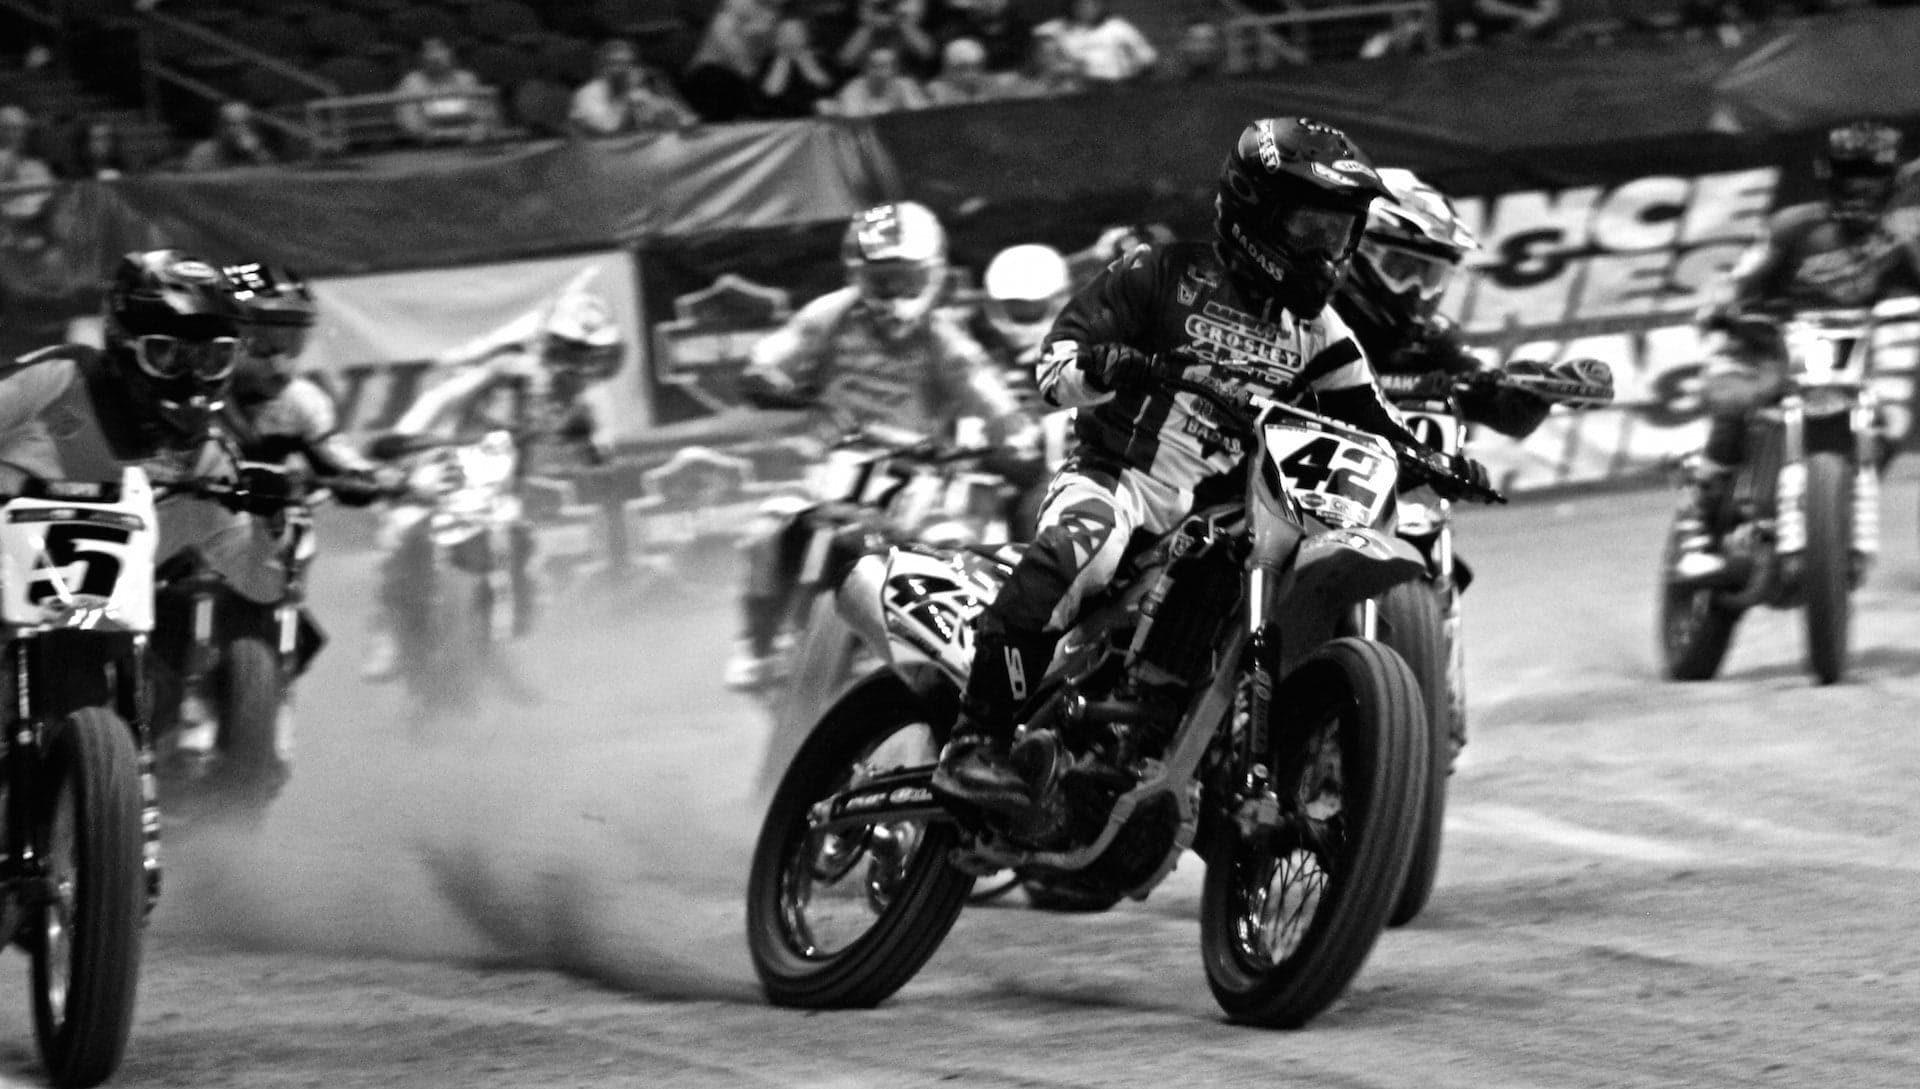 Dirt and Guts at the AMA Pro Flat Track Finale